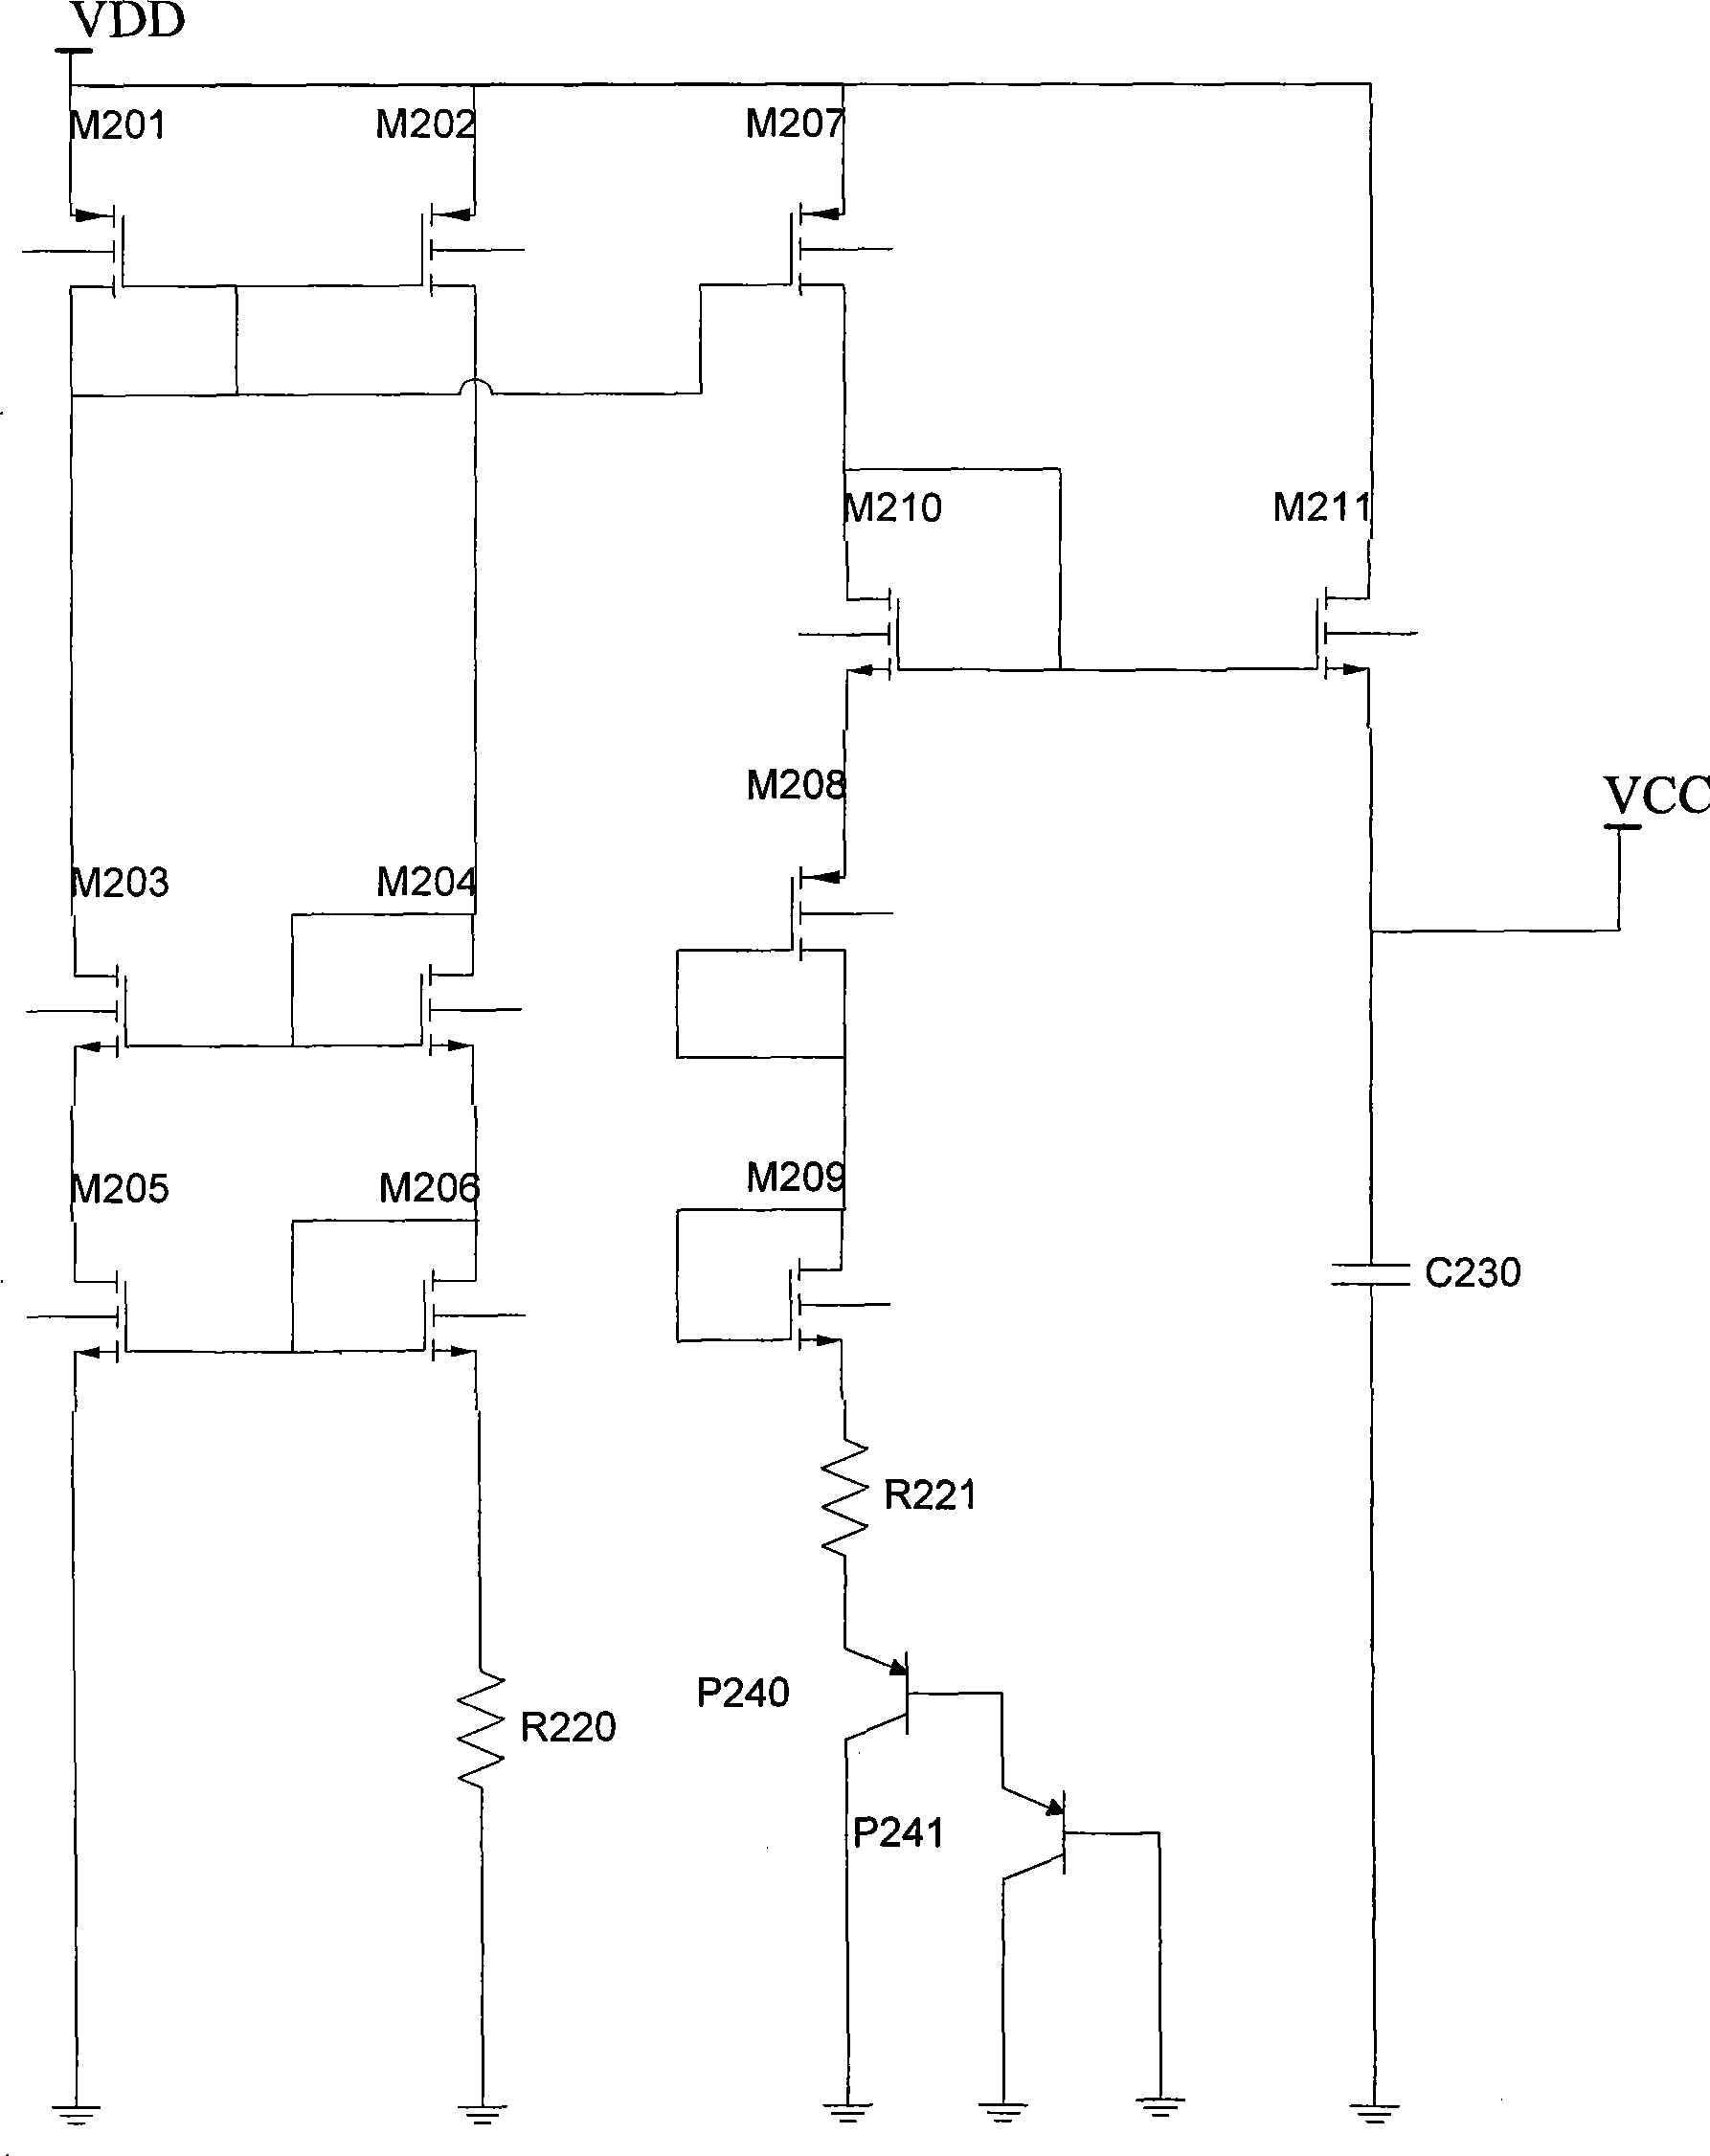 High and low voltage changeover circuit